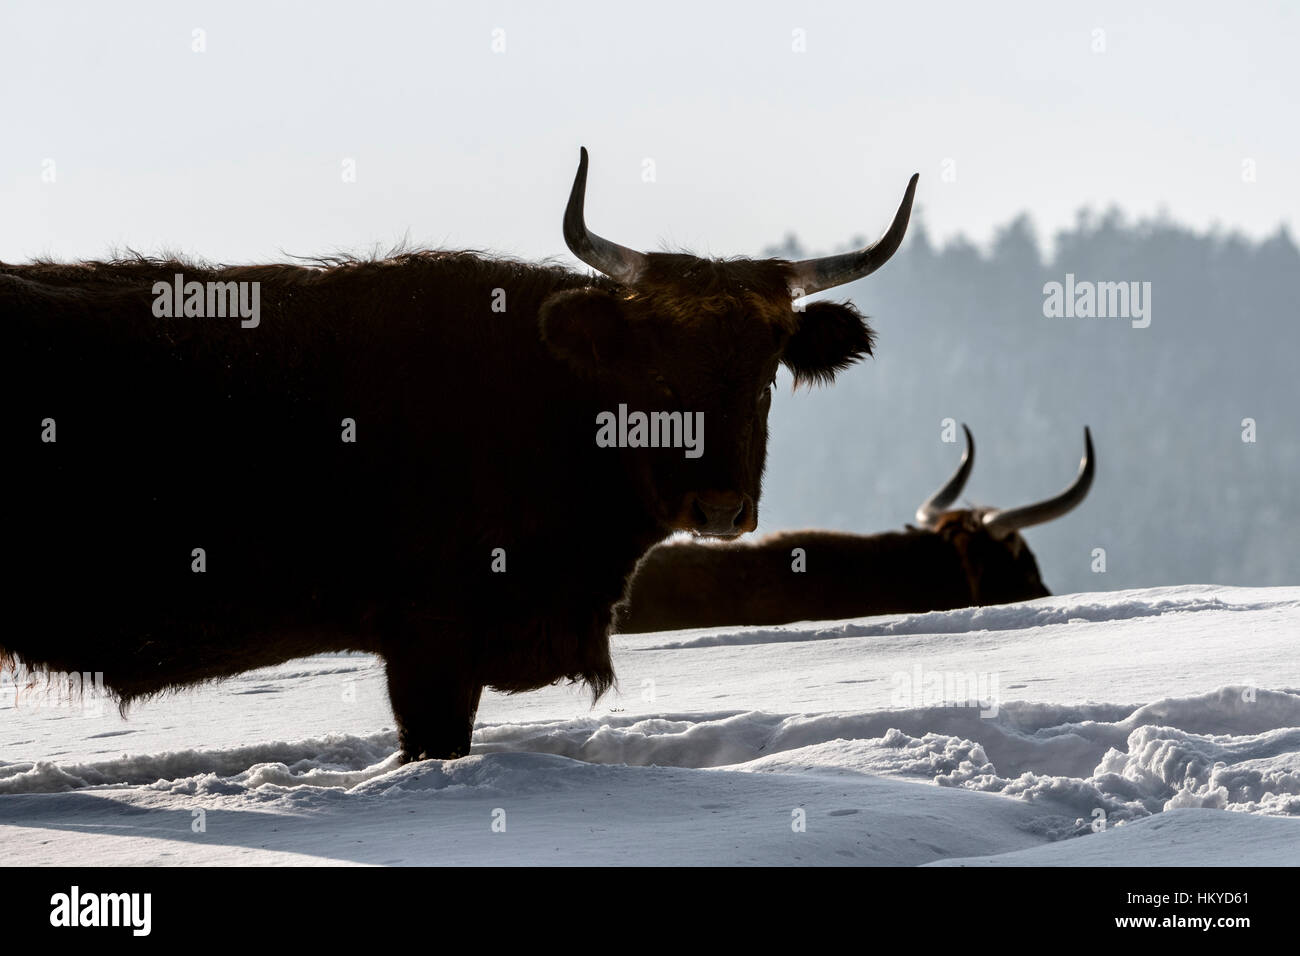 Heck cattle (Bos domesticus) bull in the snow in winter. Attempt to breed back the extinct aurochs (Bos primigenius) Stock Photo